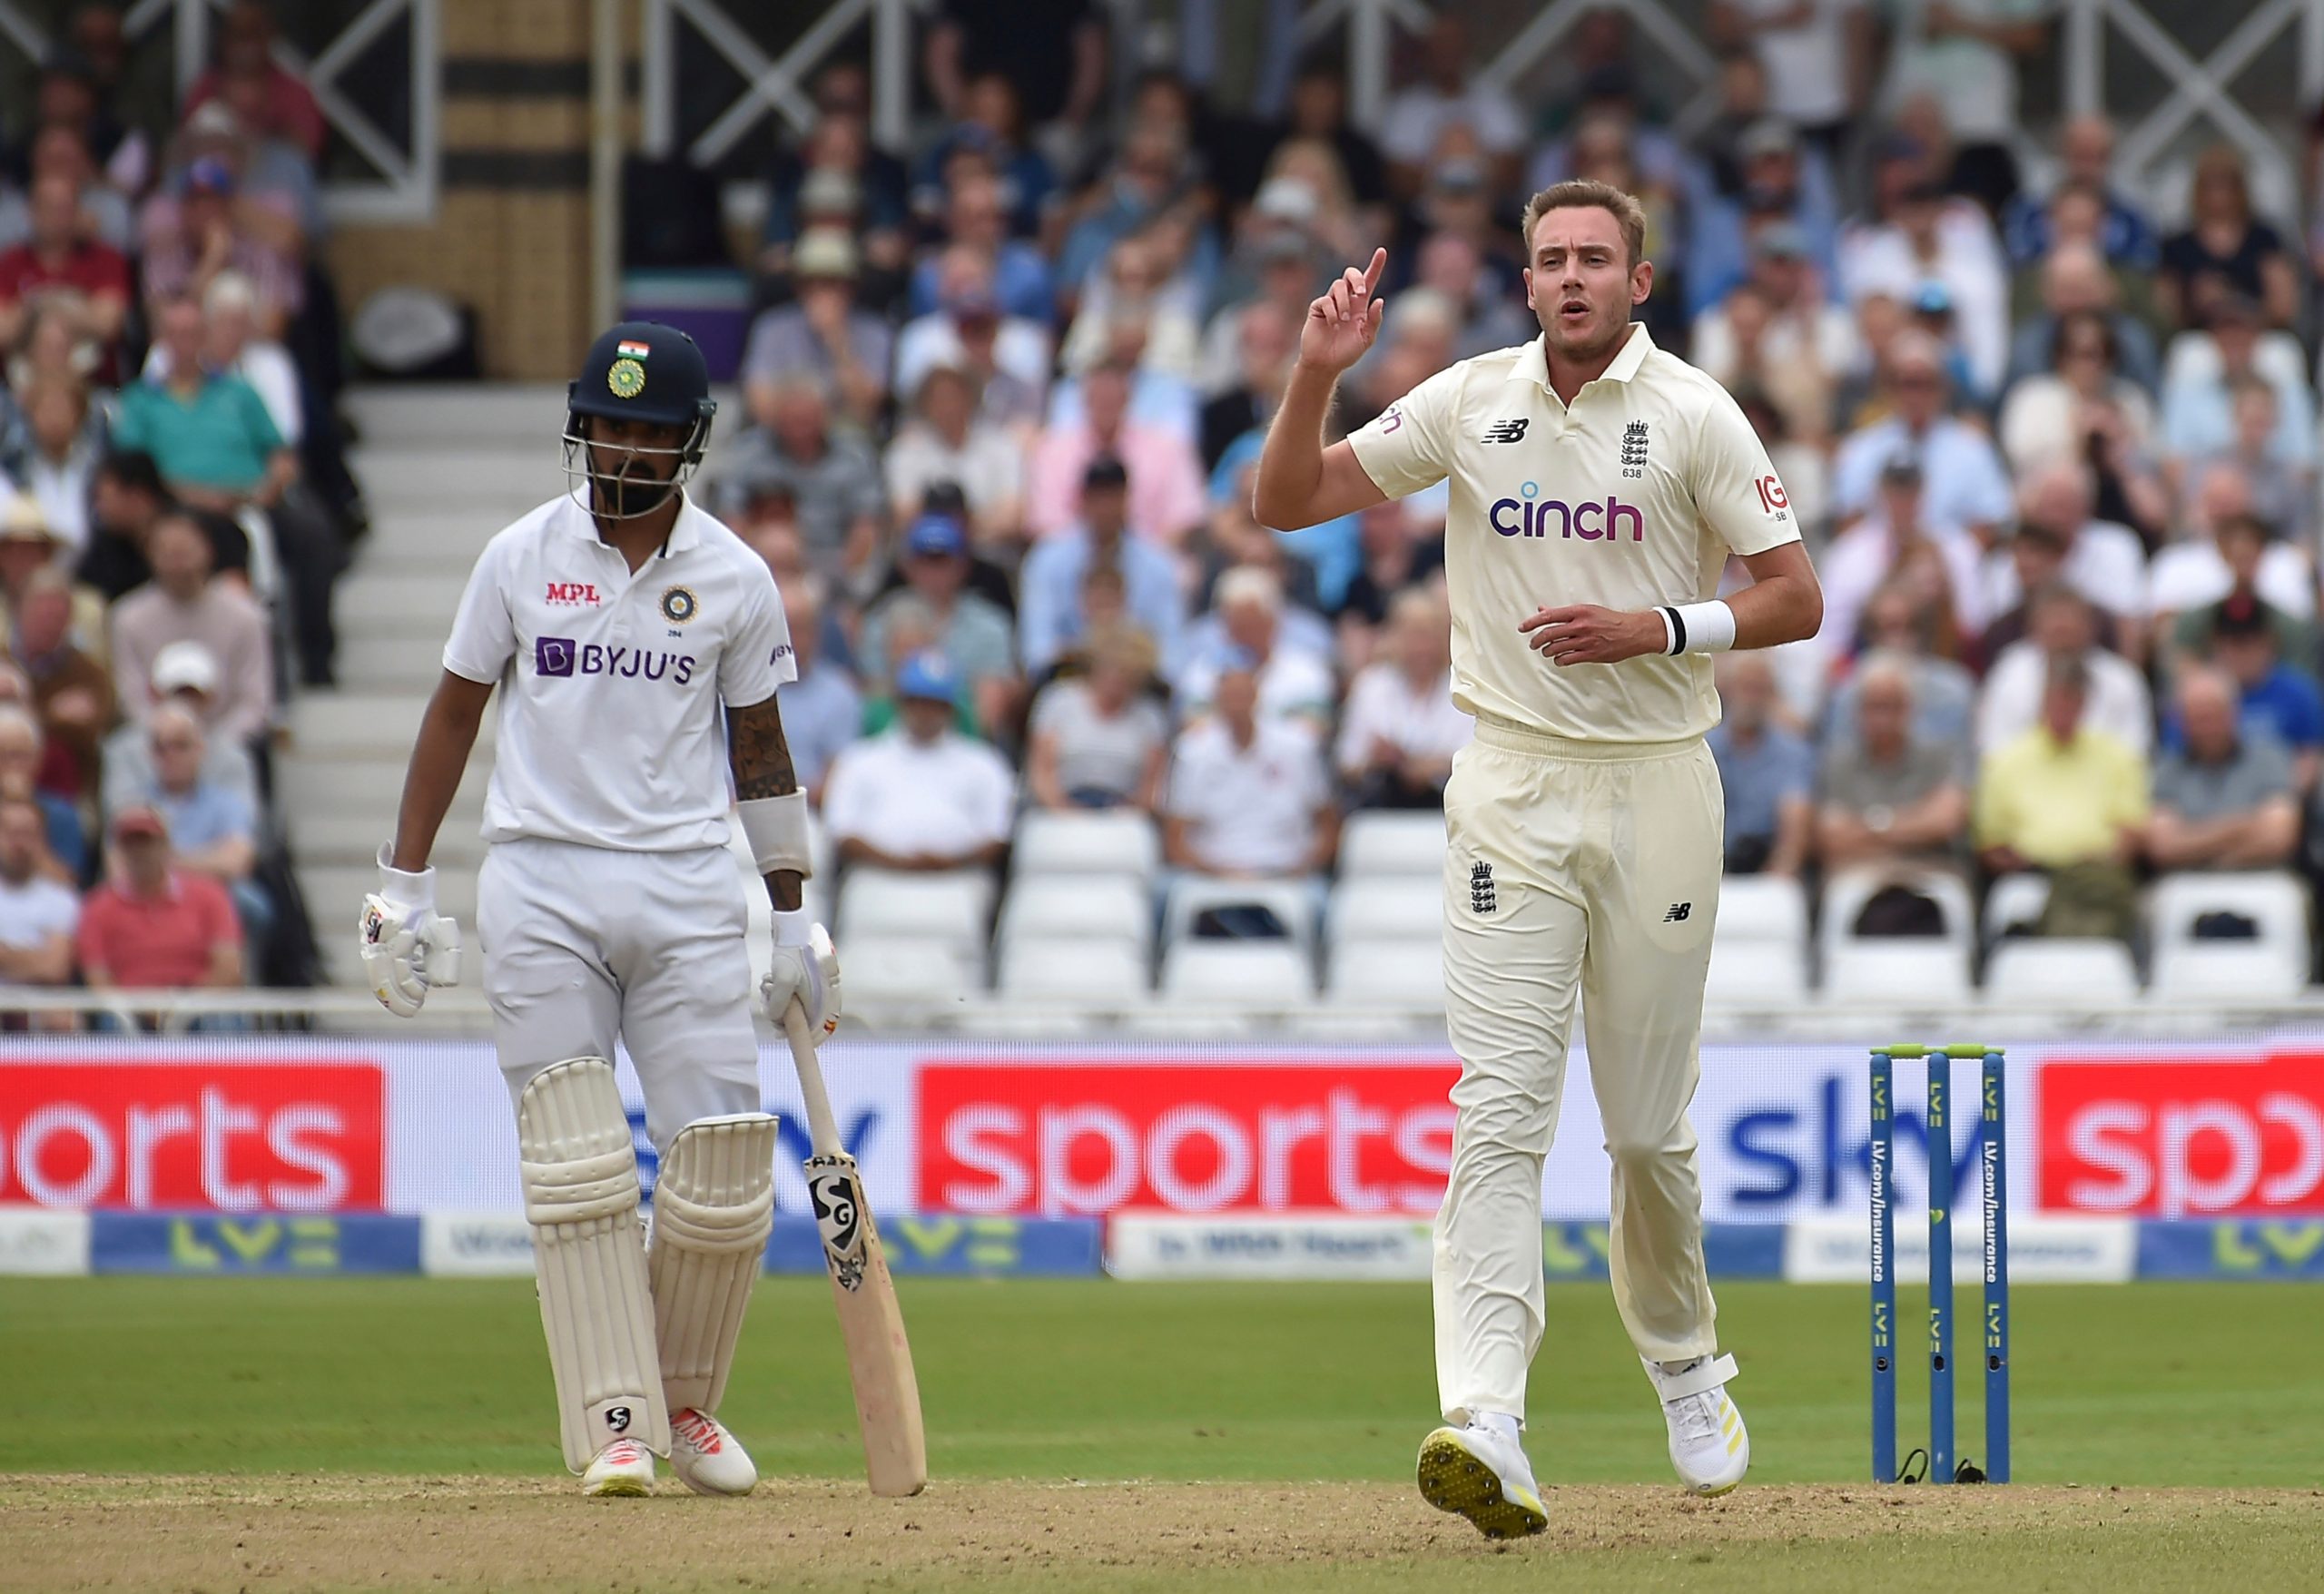 Ashes-bound Stuart Broad to ECB: Give us best possible chance to be mentally strong